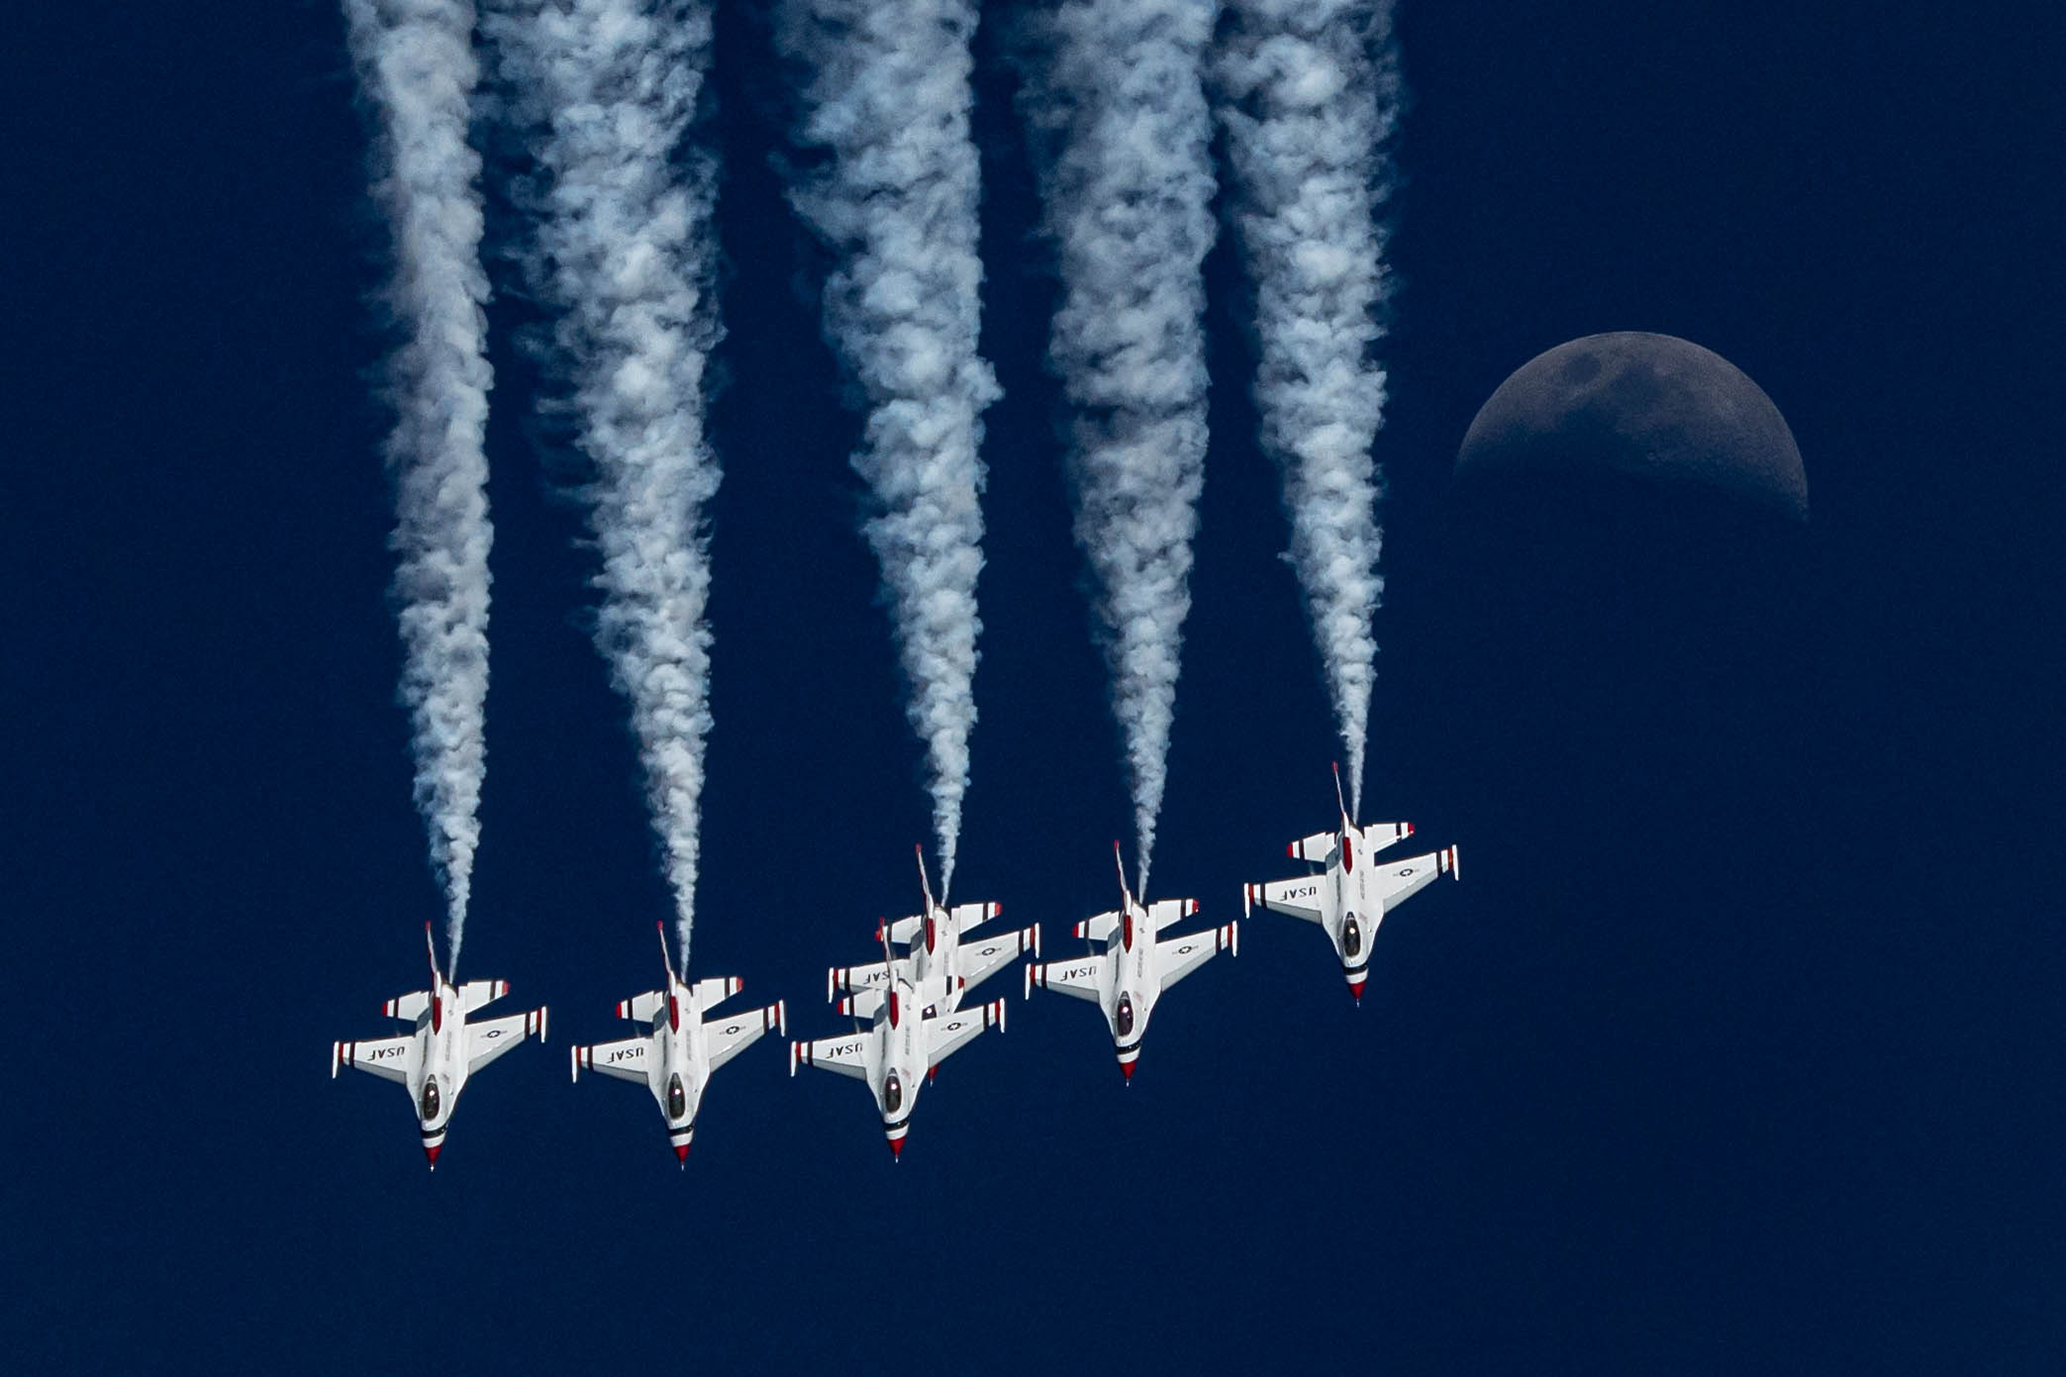 r/aviation - Fly Me To The Moon